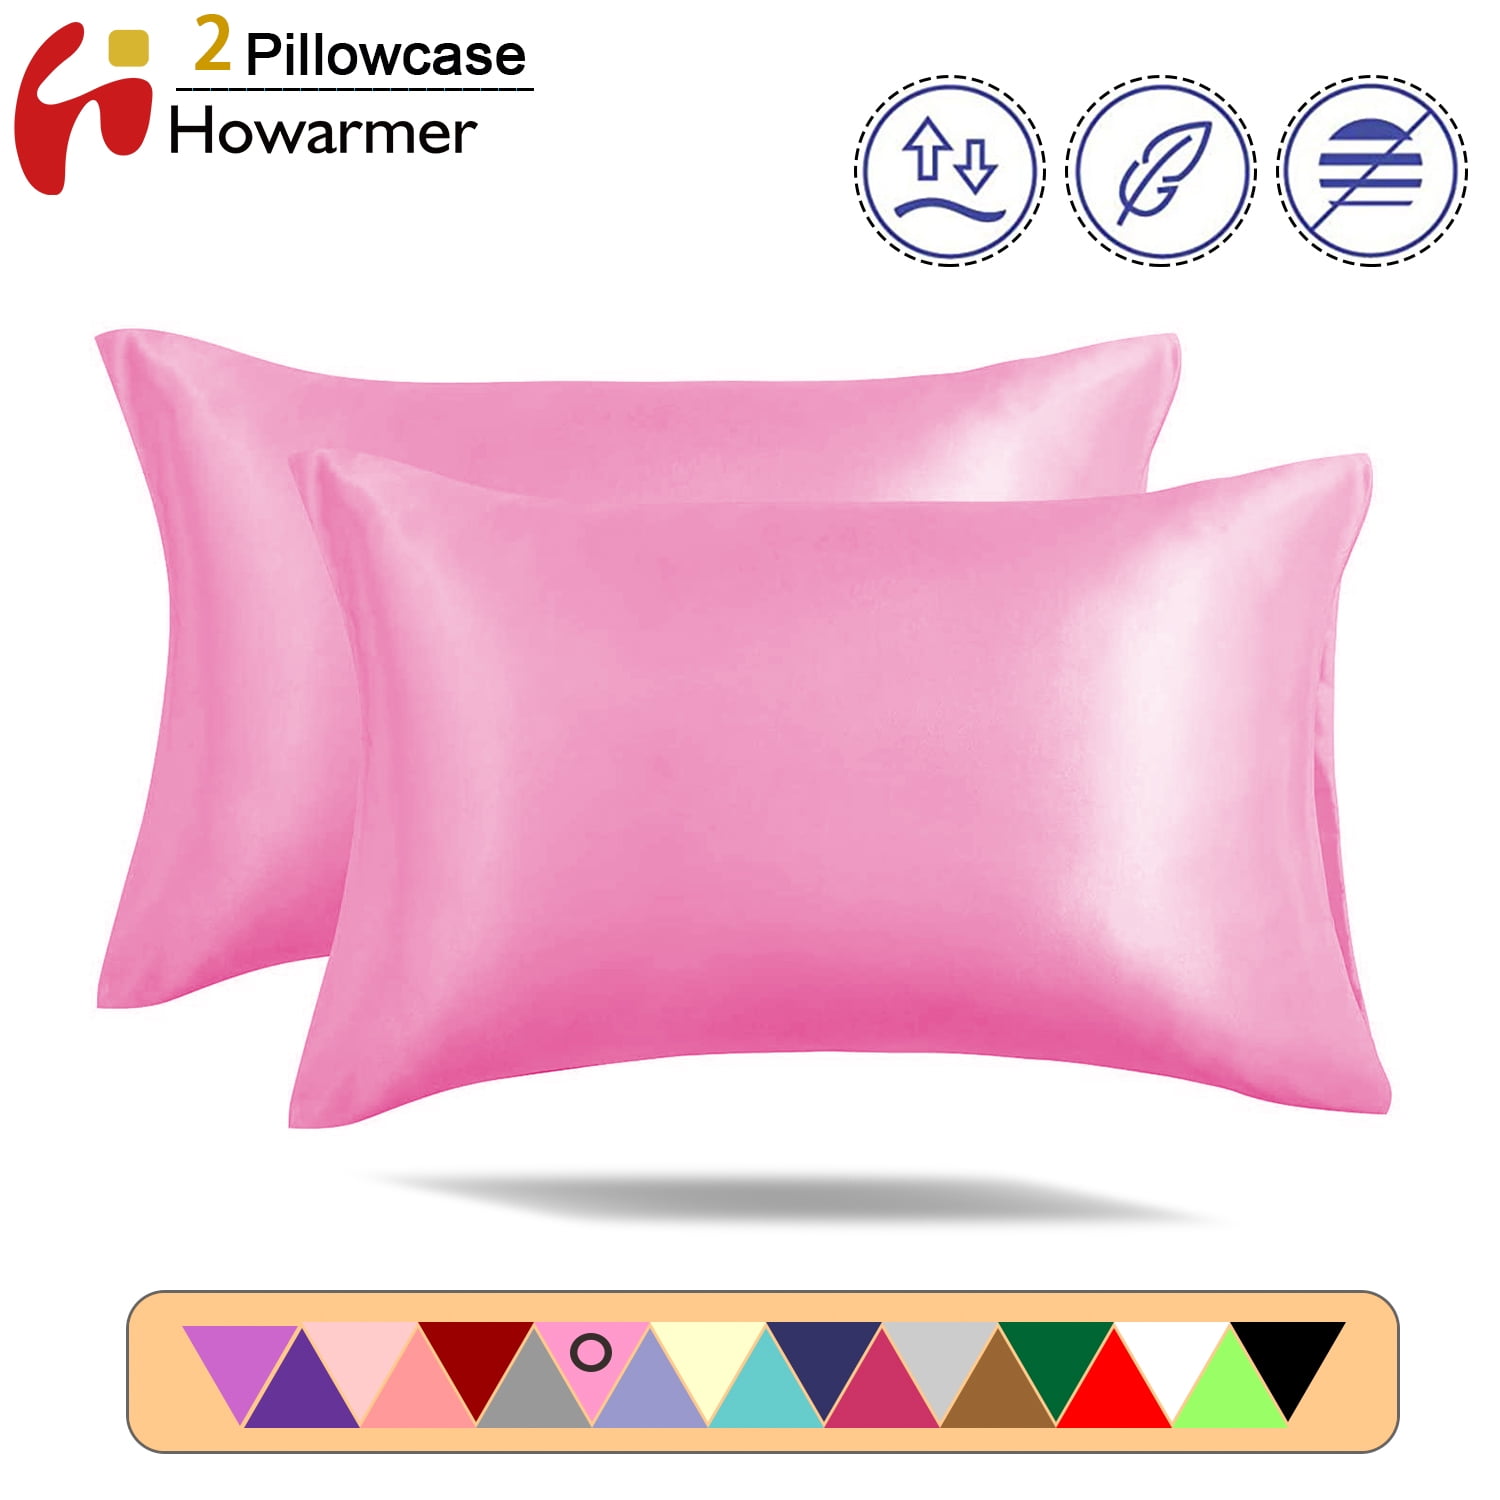 Details about   Body Pillowcase Cool Cotton Material Luxury Quality COVER ONLY 